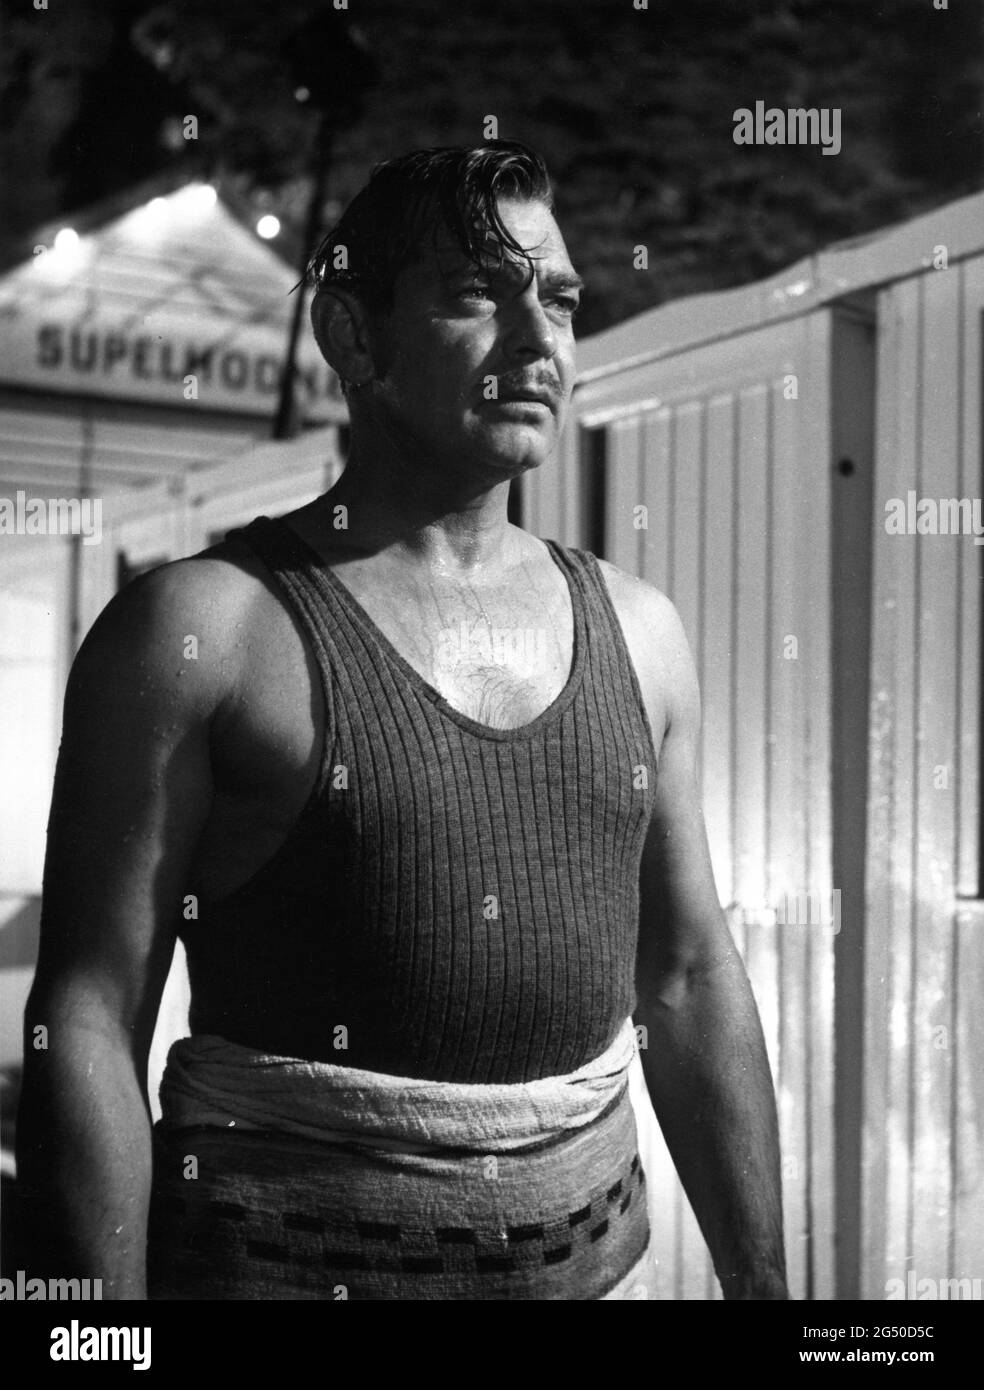 CLARK GABLE in NEVER LET ME GO 1953 director DELMER DAVES from novel Come The Dawn by Paul Winterton producer Clarence Brown Metro Goldwyn Mayer Stock Photo